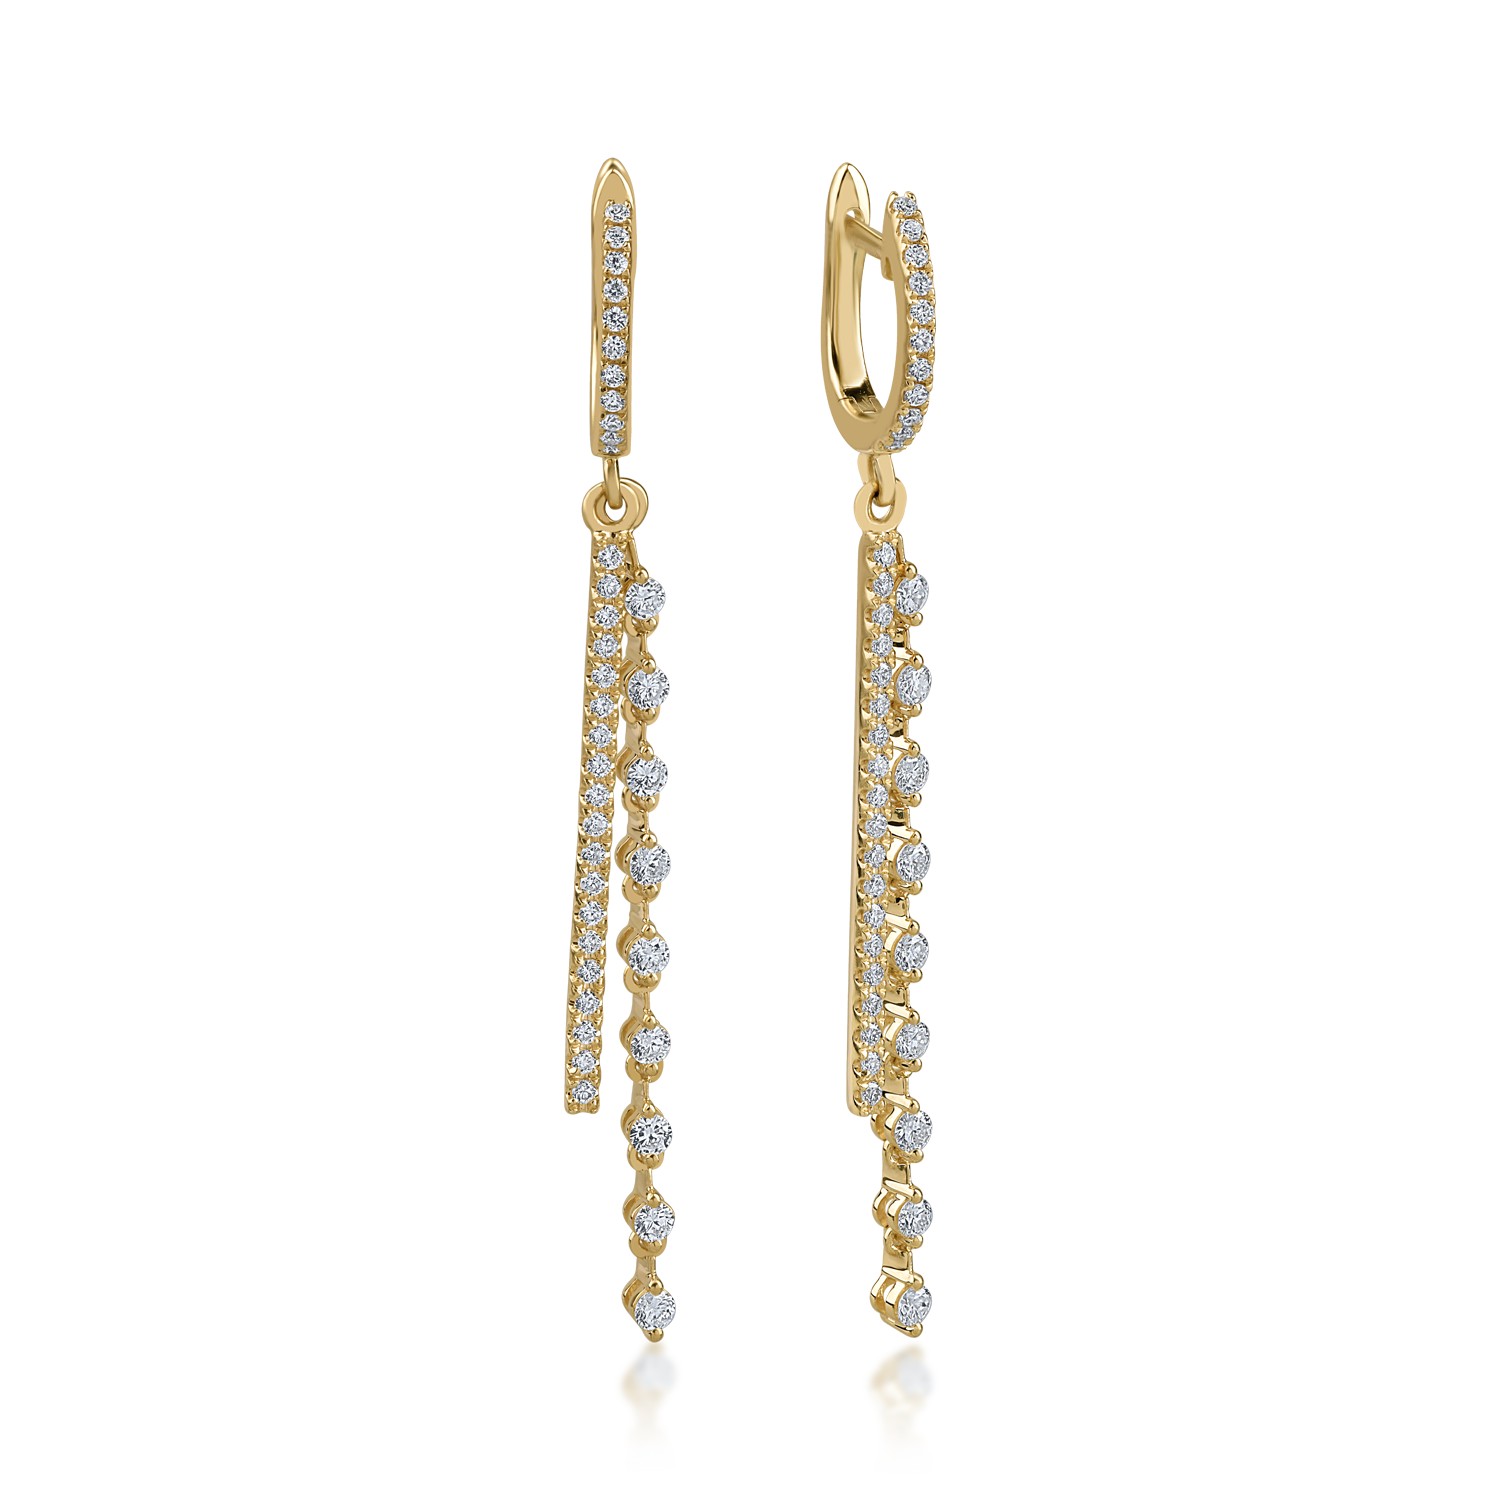 Yellow gold earrings with 0.93ct diamonds